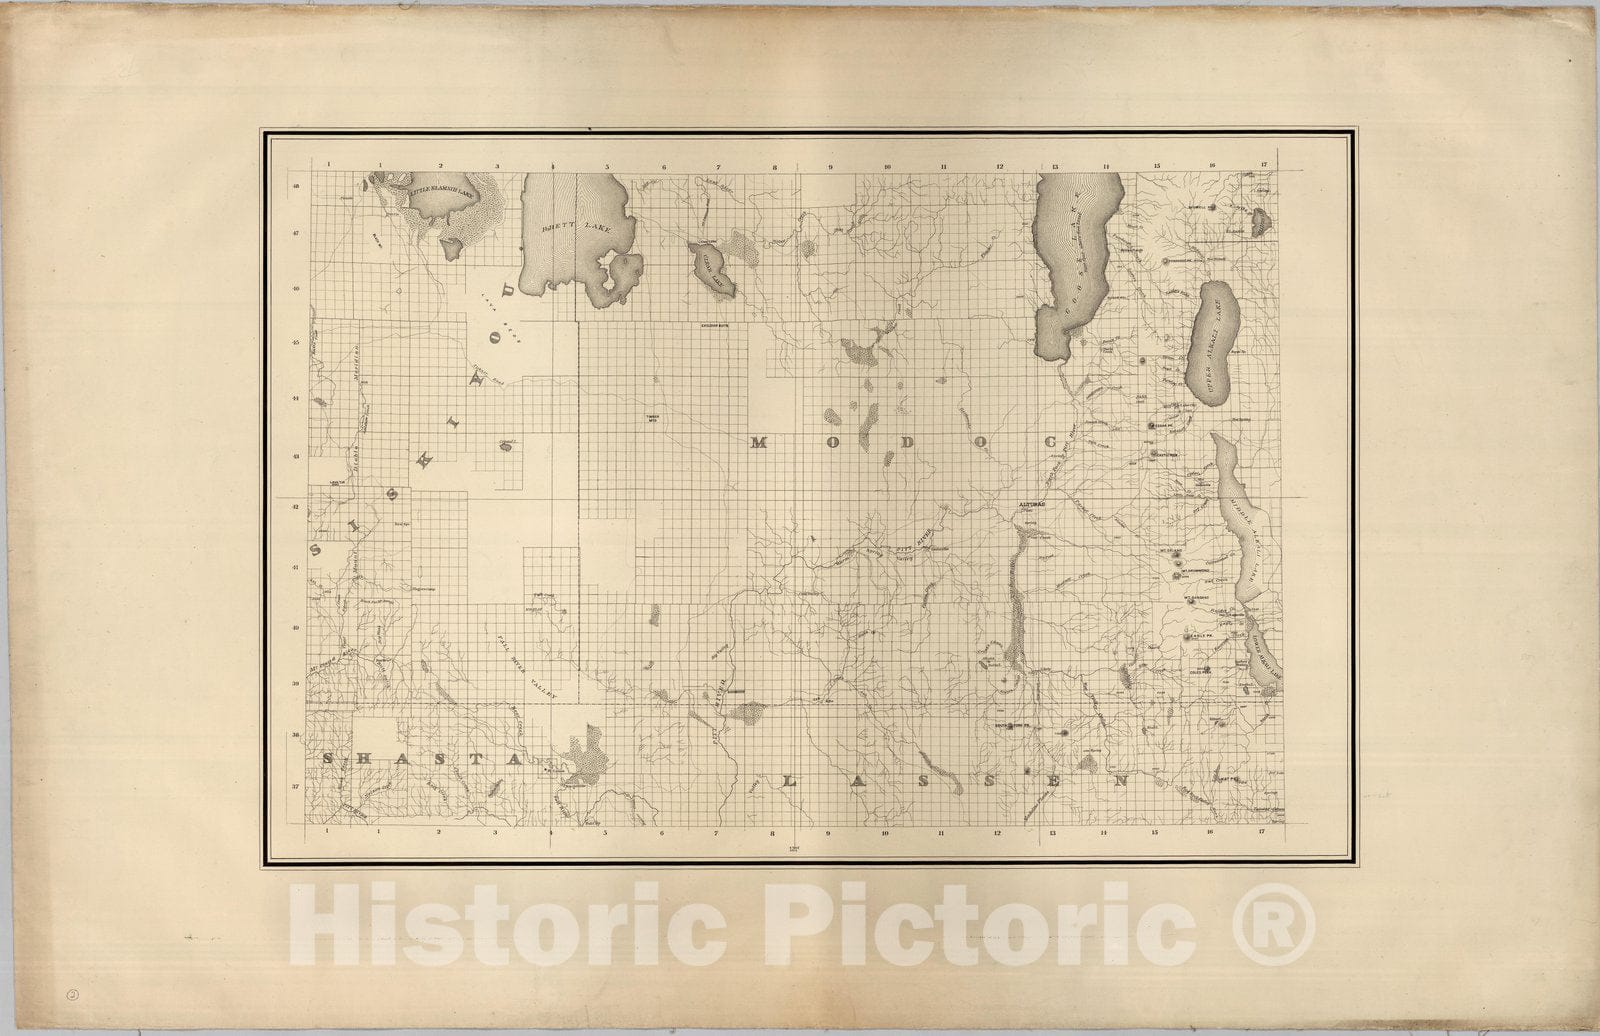 Historic Map : State Engineer's Map of Northern California, Northern California, Siskiyou, Modoc Counties (sheet 2) 1884 - Vintage Wall Art